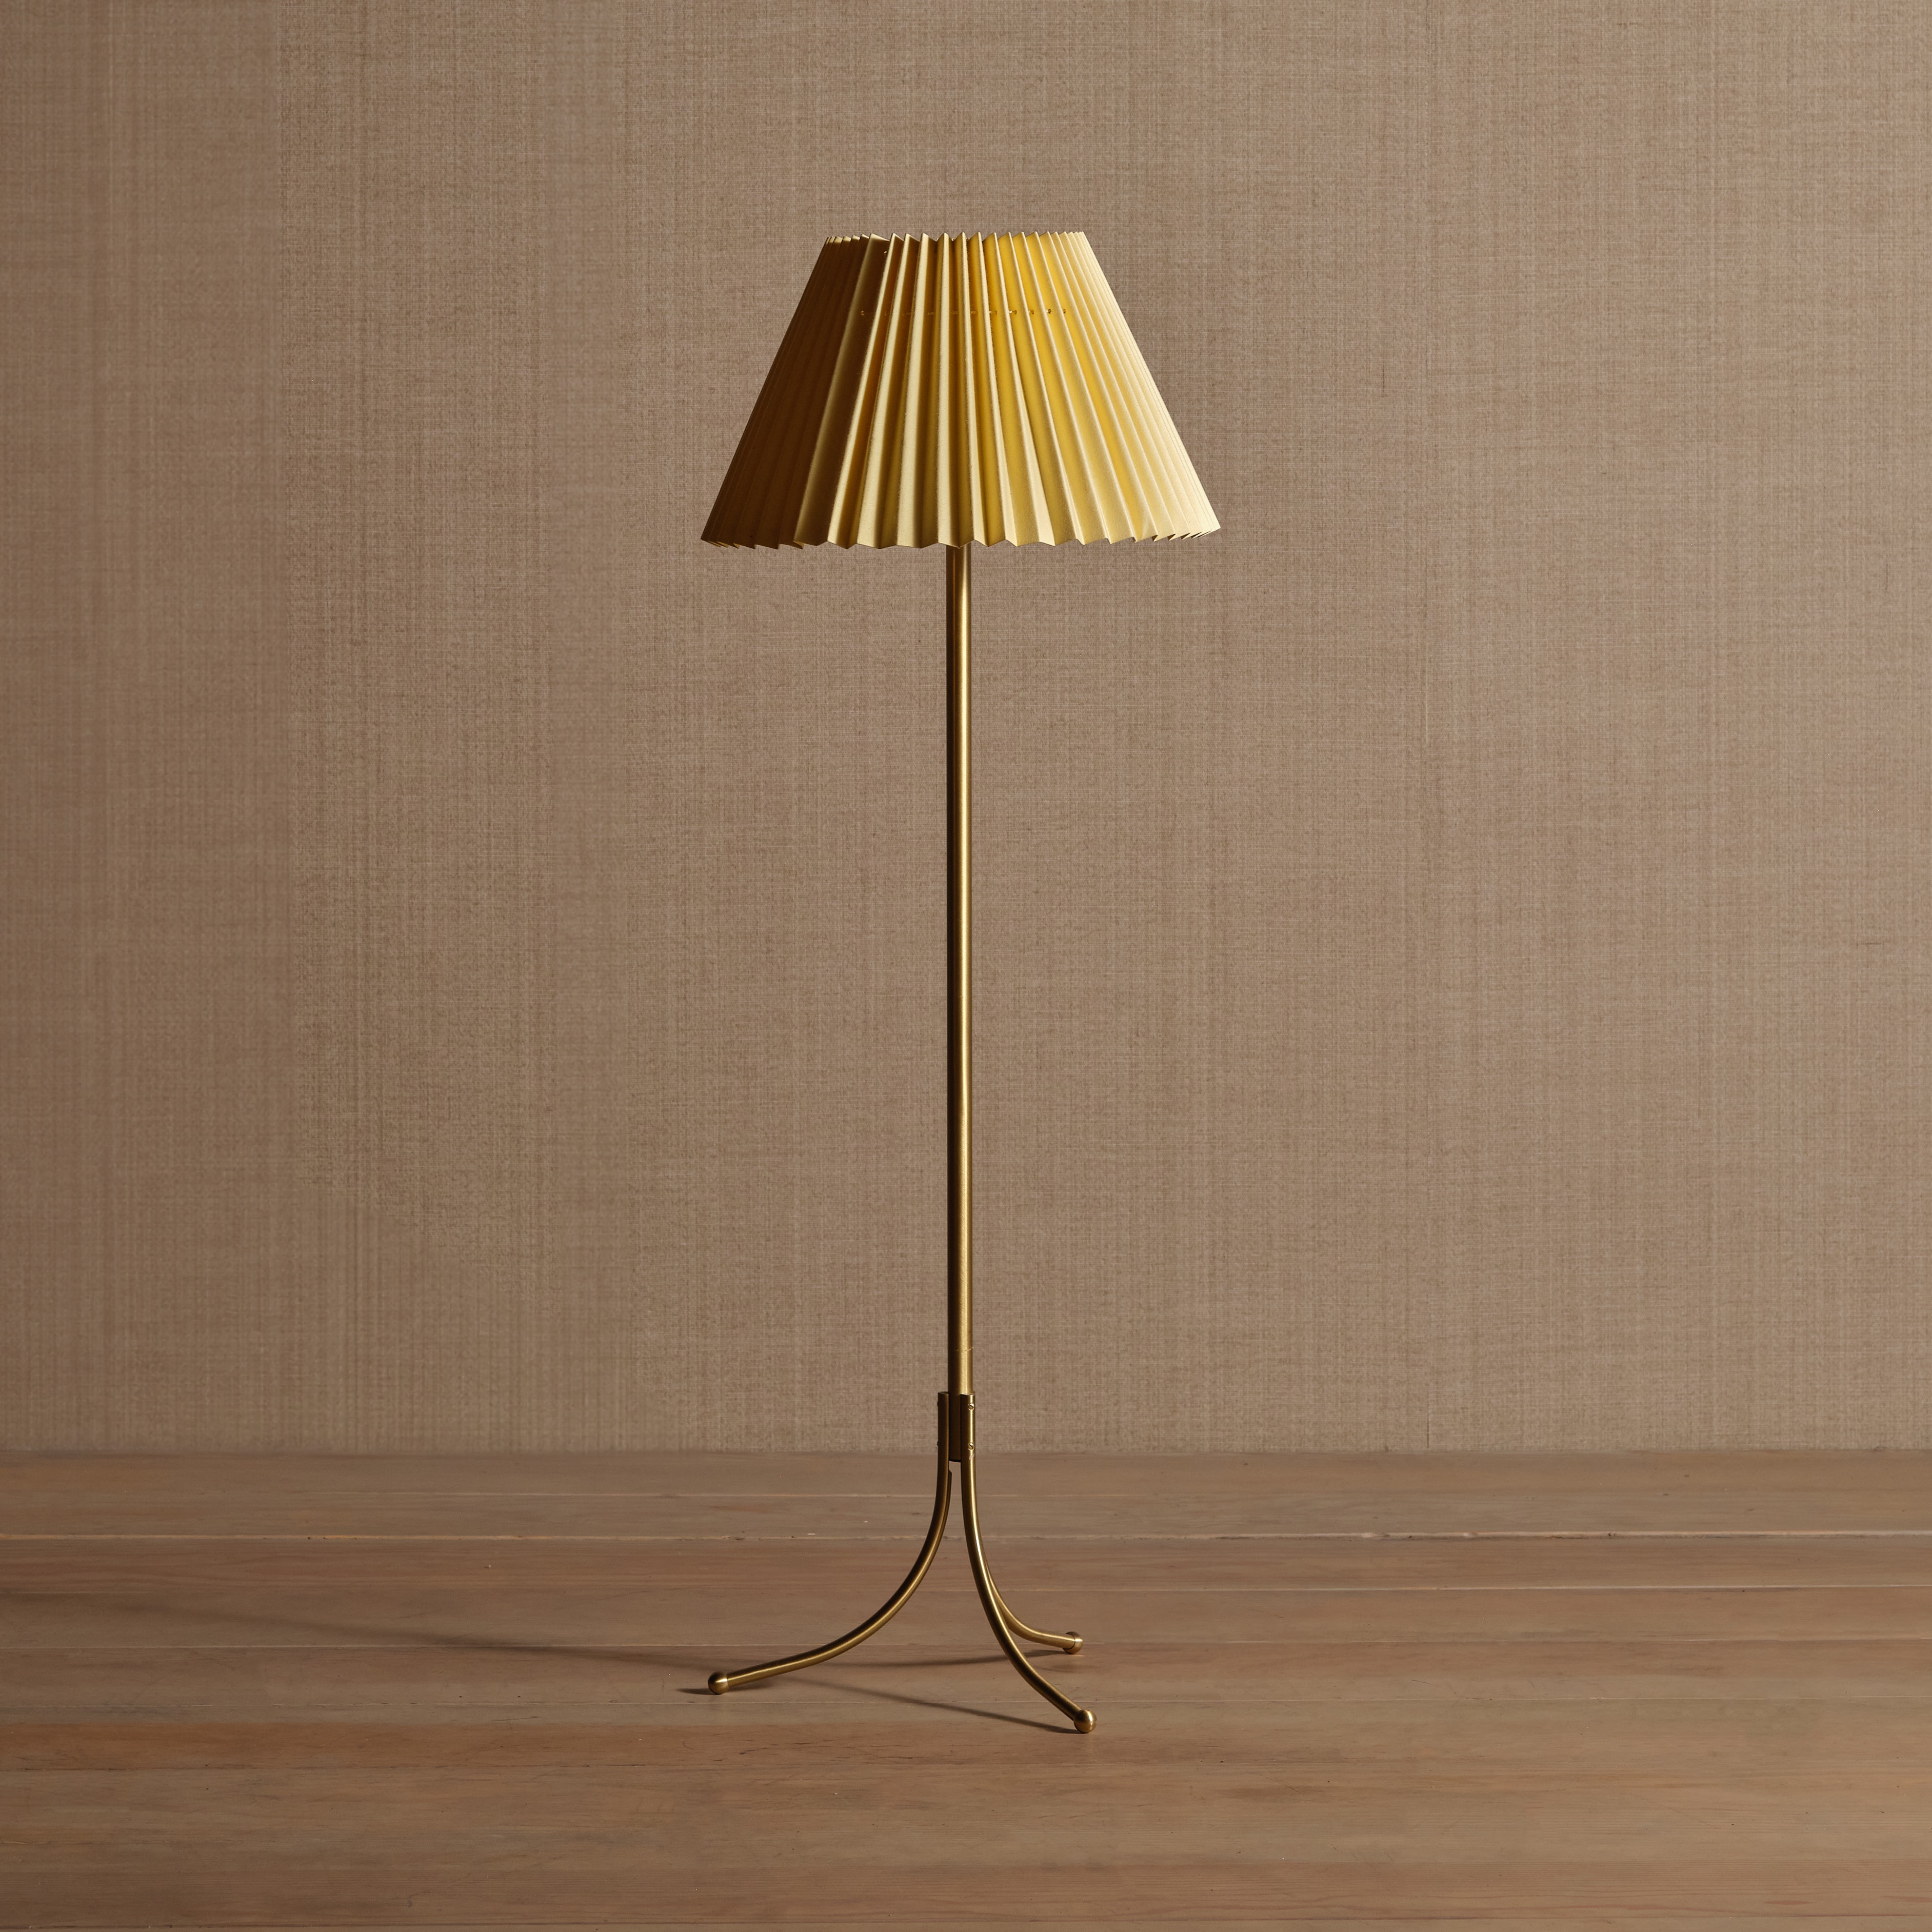 a lamp that is sitting on a table